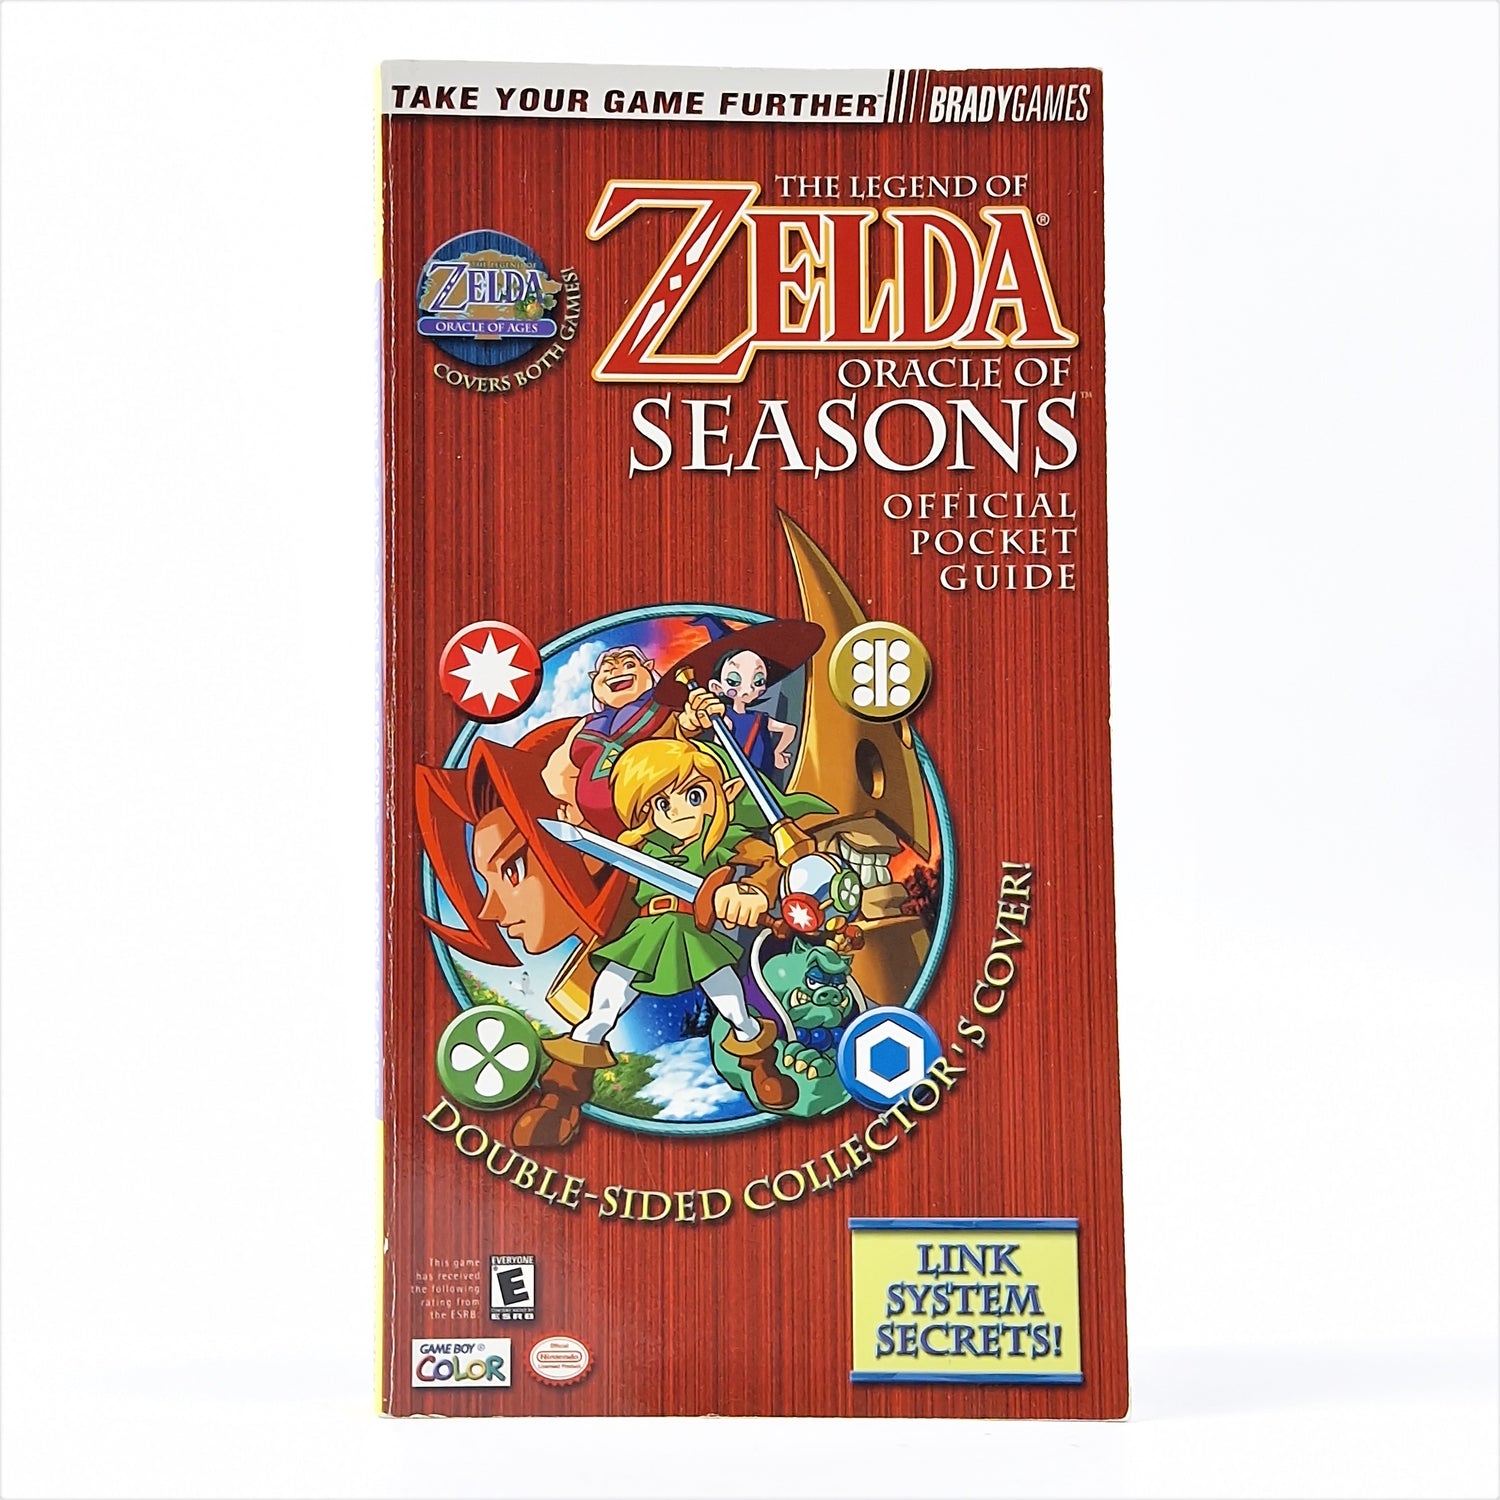 Bradygames official Pocket Guide Book : Zelda Oracle of Ages & Seasons